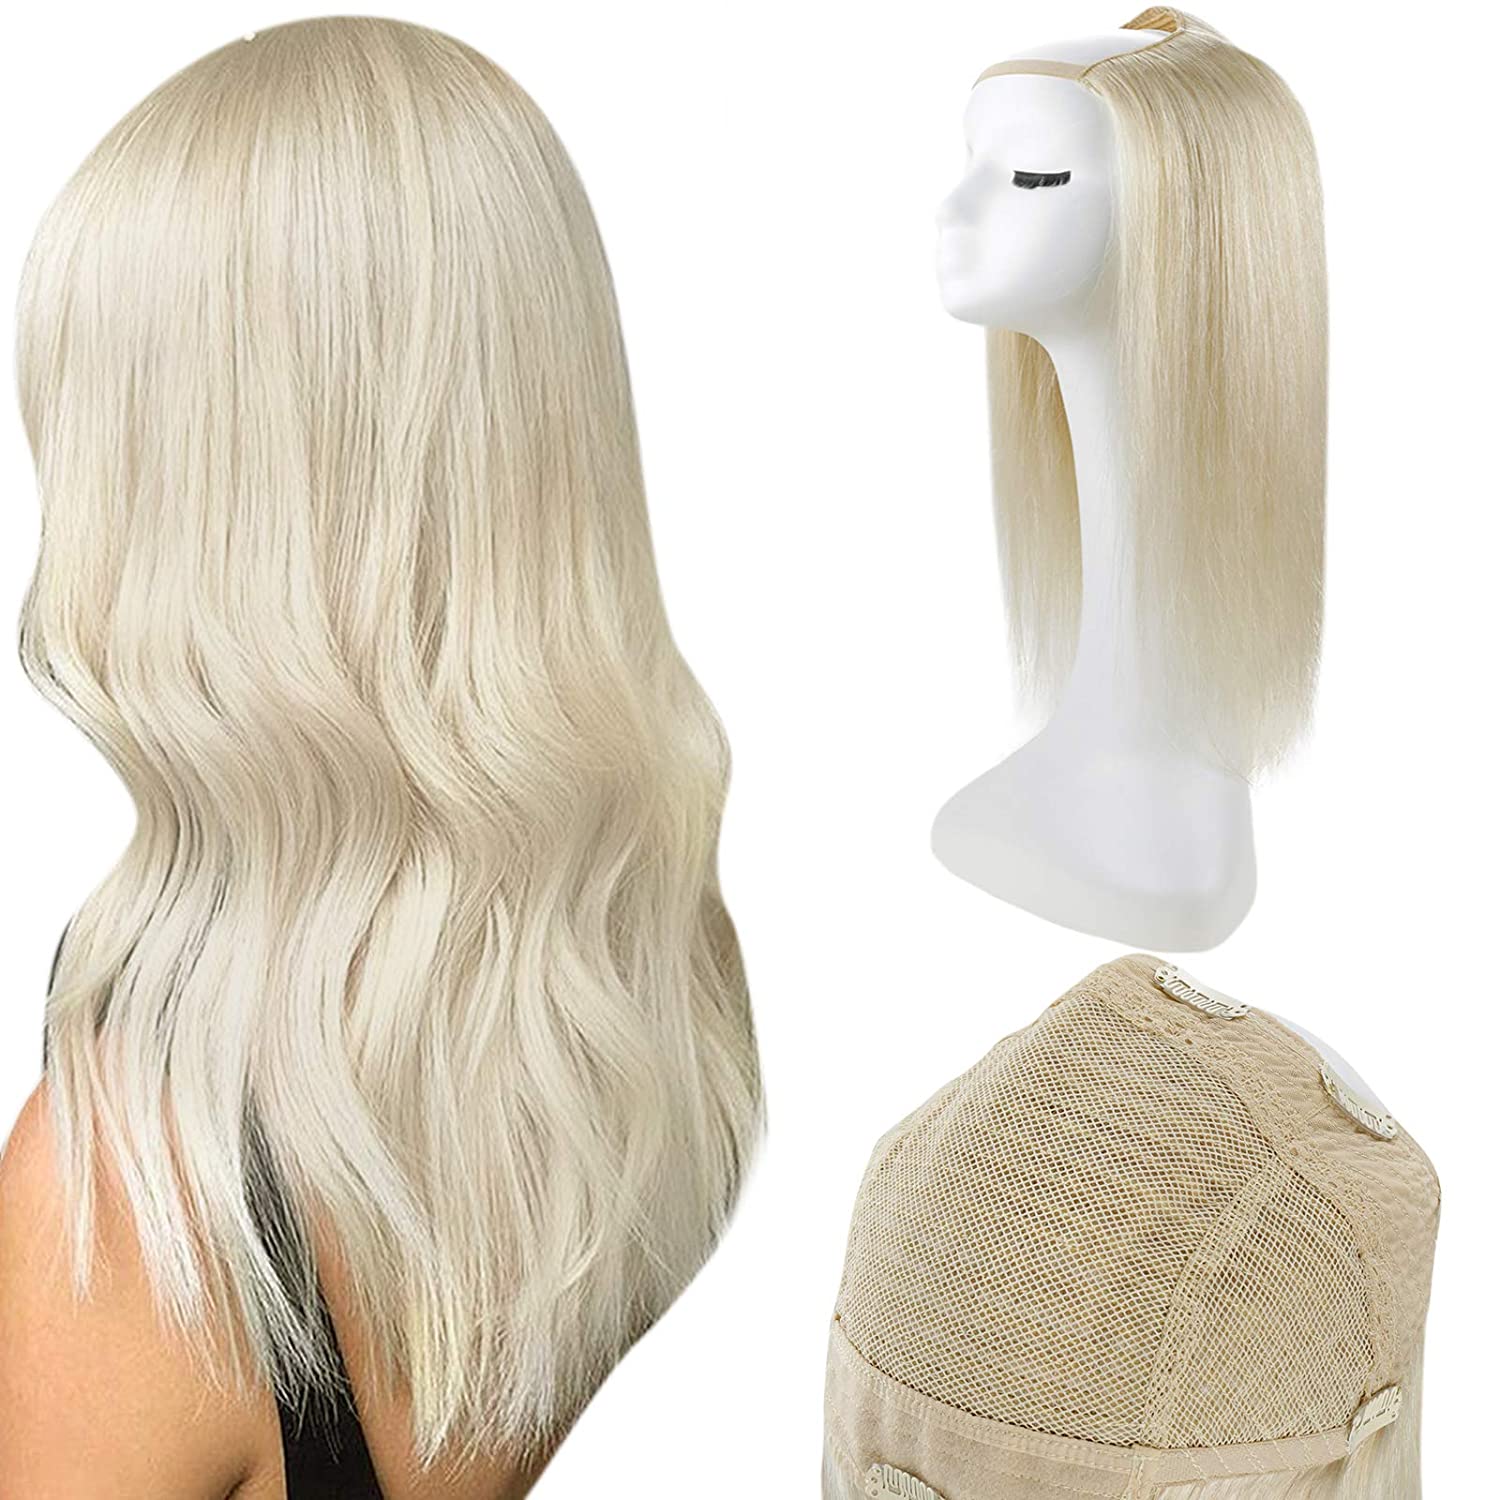 U Part Wig Real Hair Clip In Full Head One Piece Straight Extensions Remy One Piece Hair Extensions Color #60 Light Blonde - FShine Shop